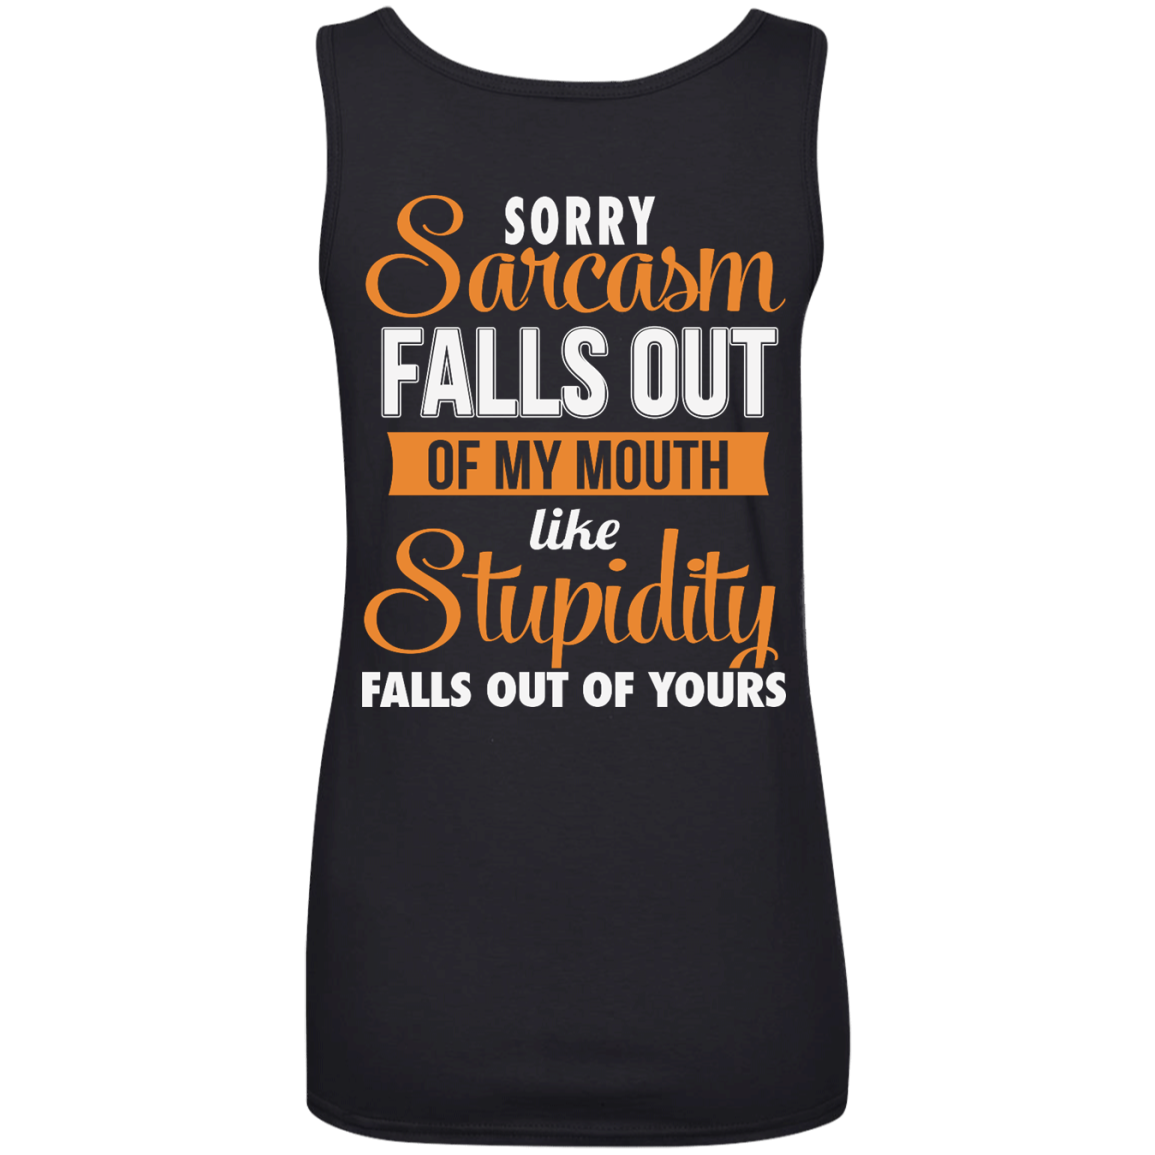 Sorry, Sarcasm Falls Out of my Mouth like stupidity t-shirt, tank top